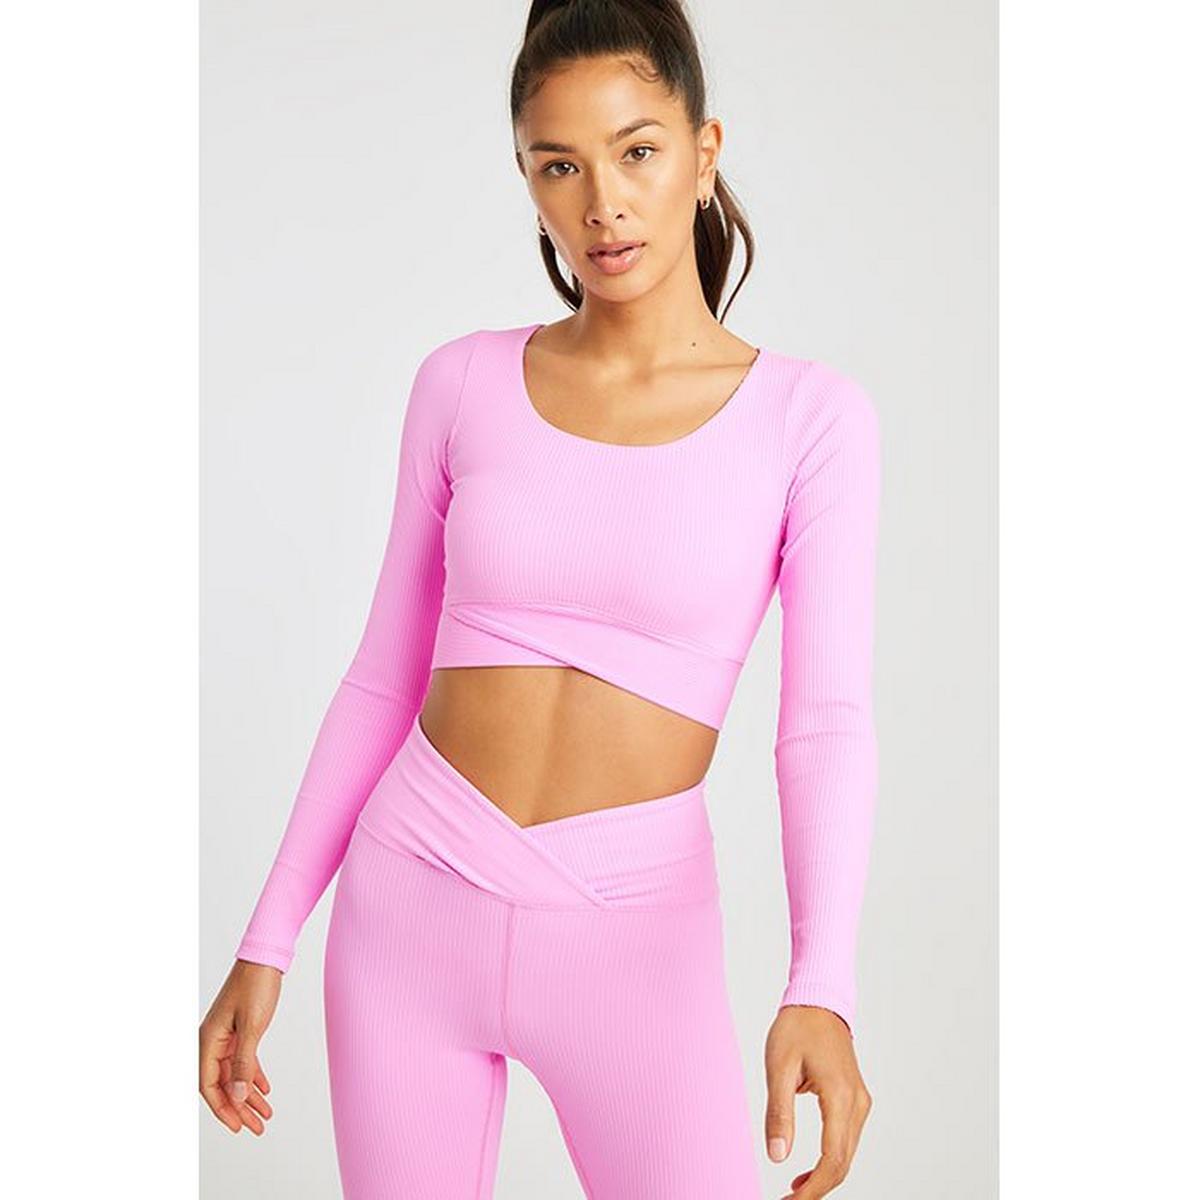 Women's Ribbed V Crop Long Sleeve Top